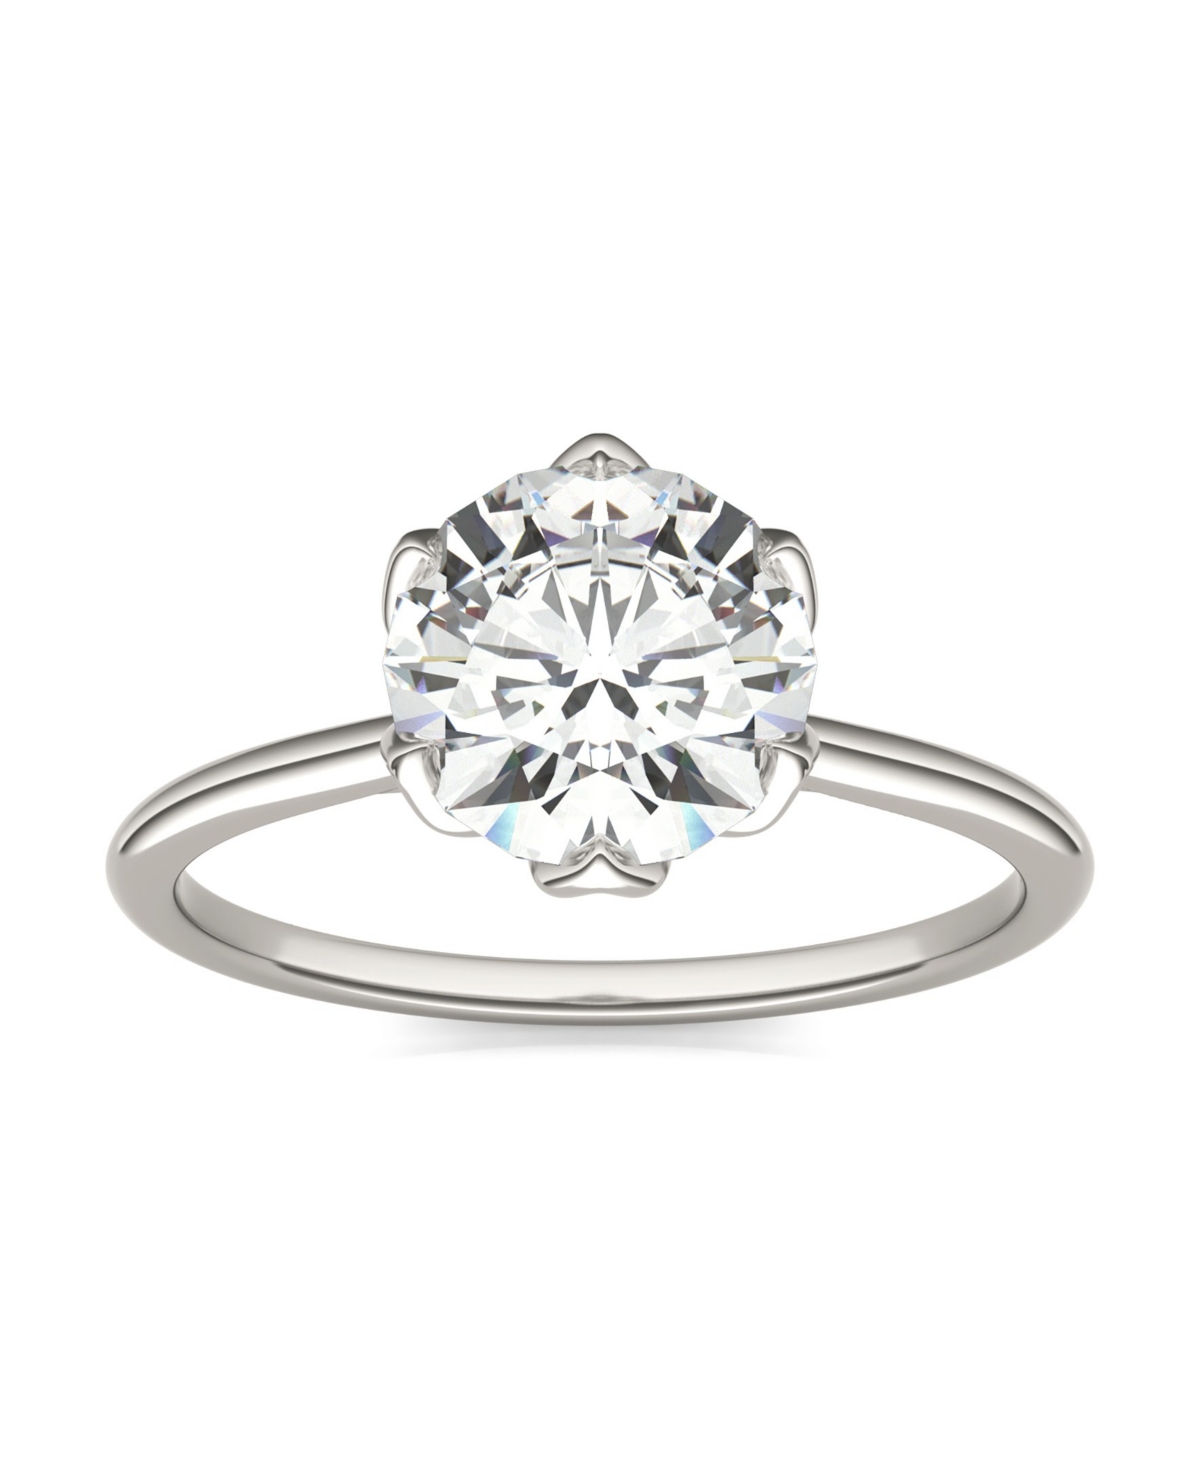 Charles & Colvard Moissanite Round Solitaire Ring (1-9/10 Carat Total Weight Diamond Equivalent) In 14k White Gold